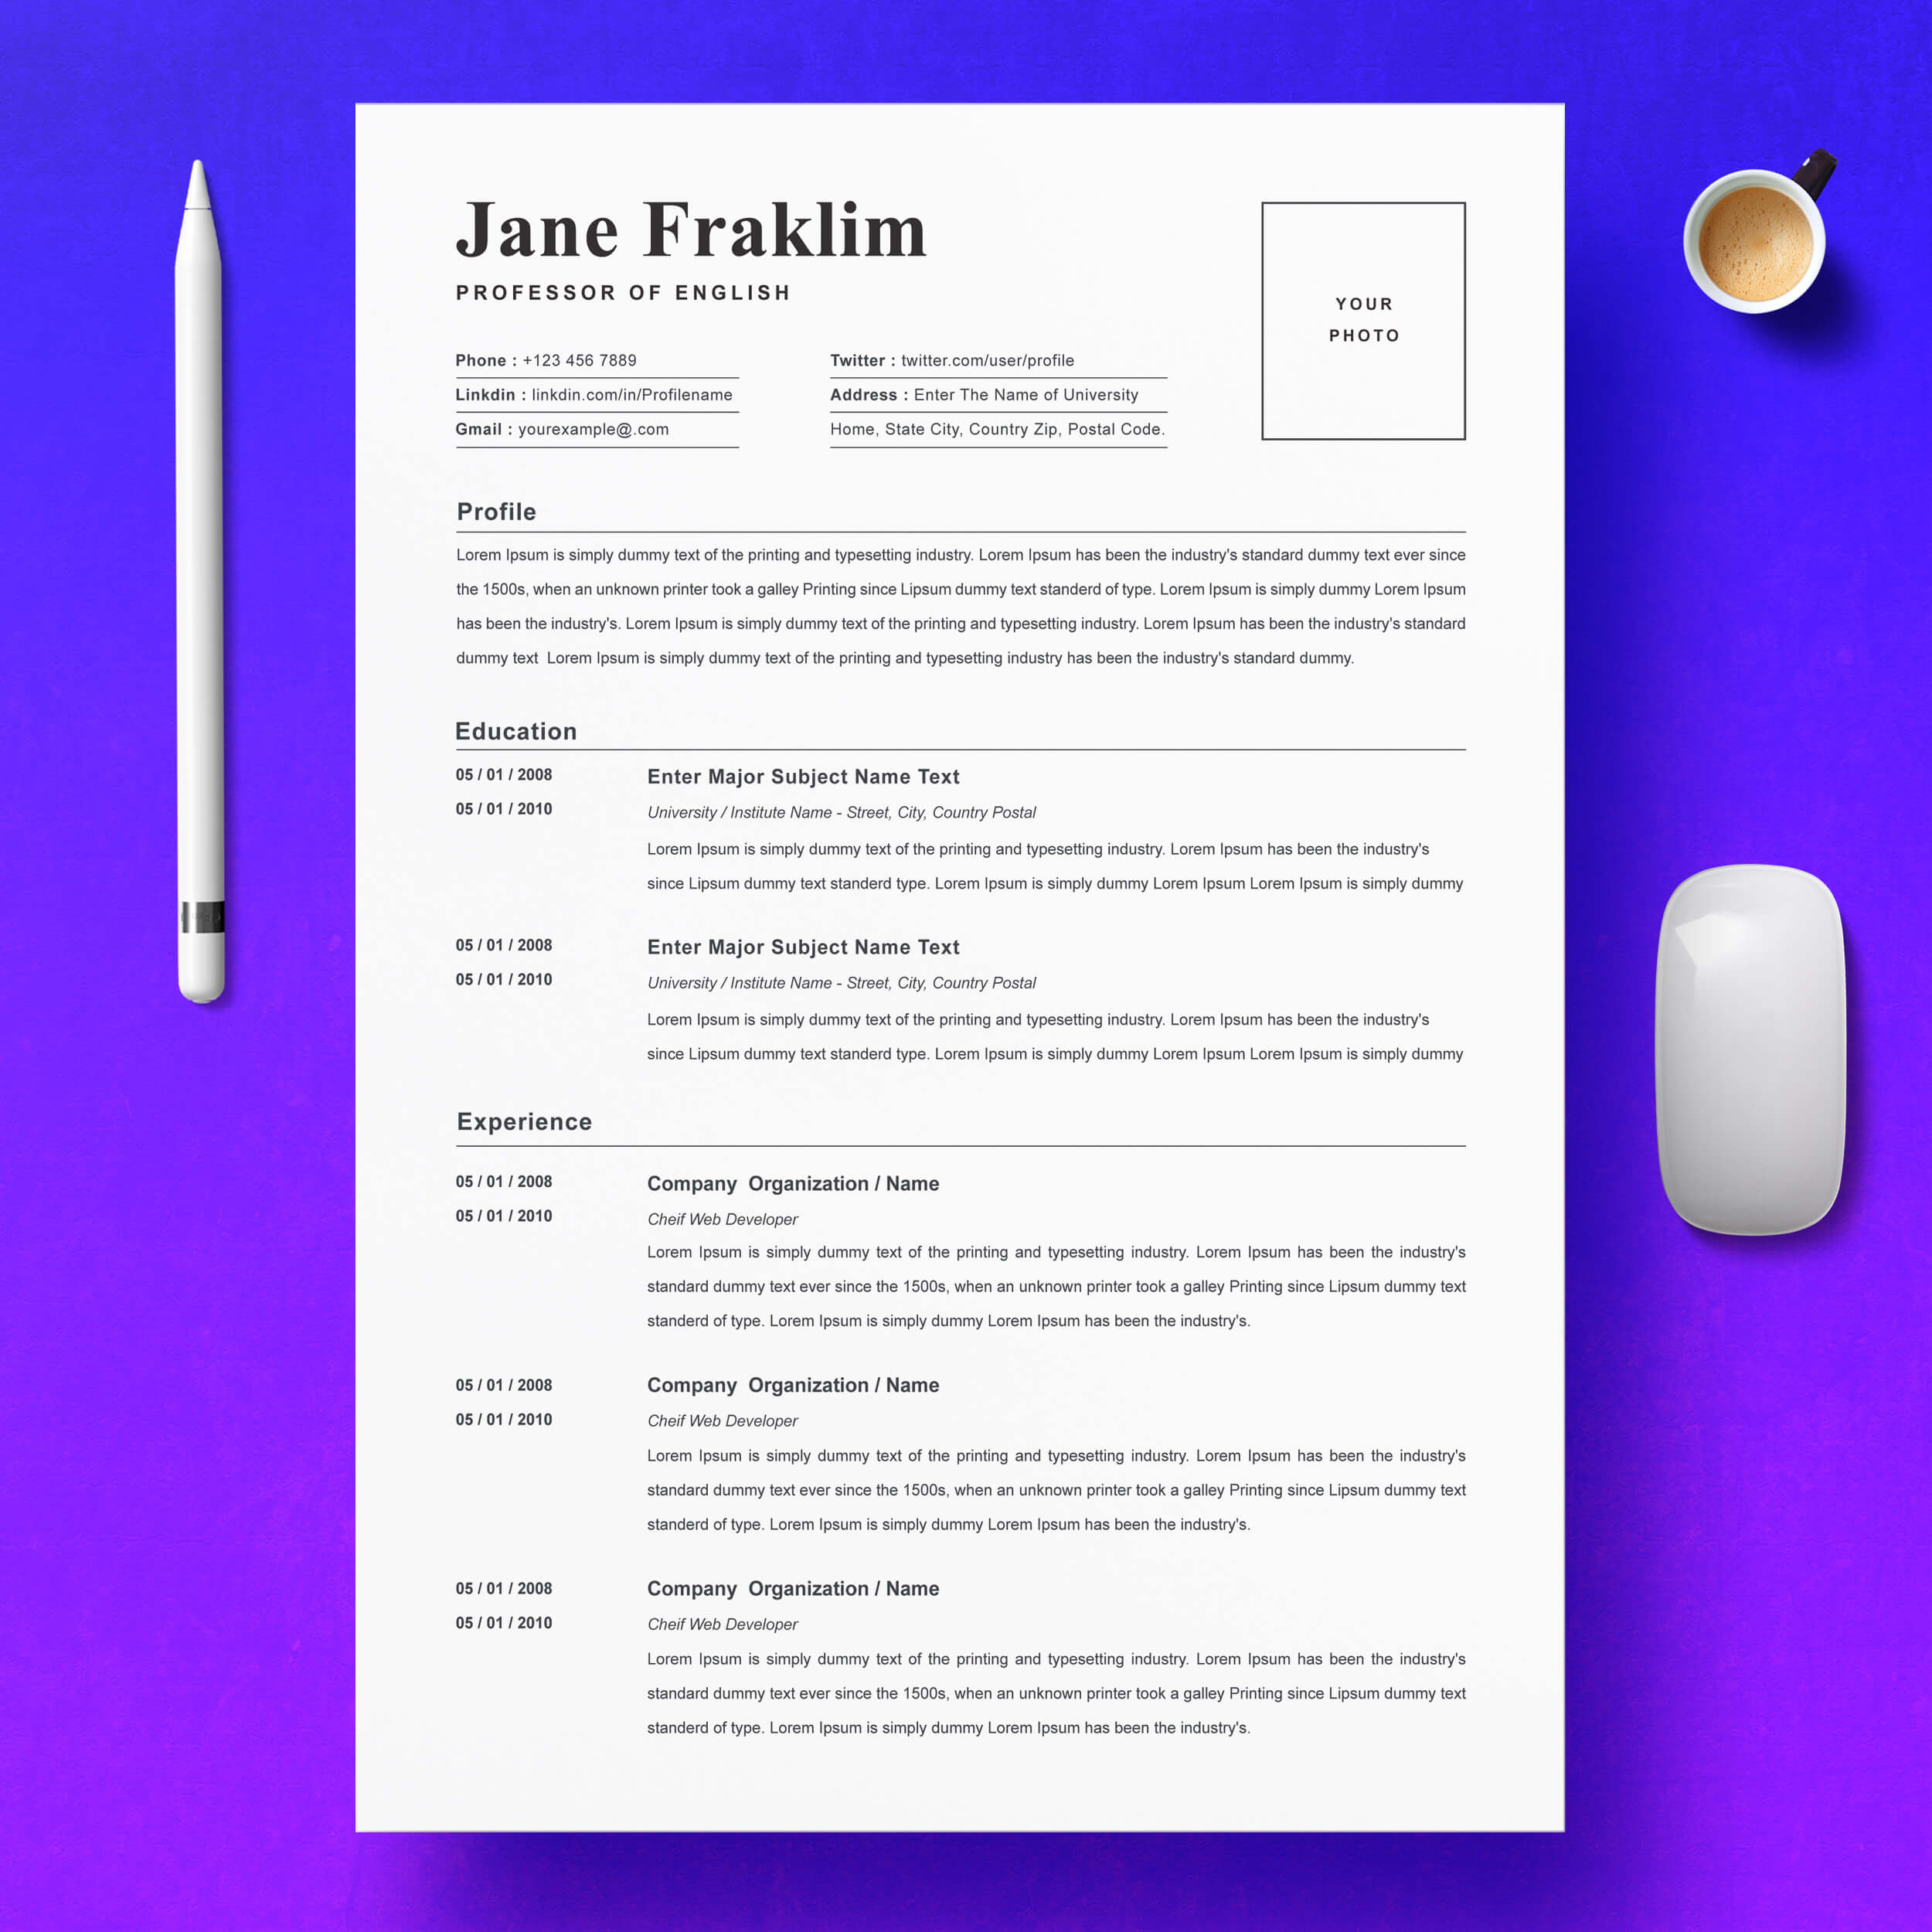 Professor Of English Resume Template | Simple Resume Template cover image.